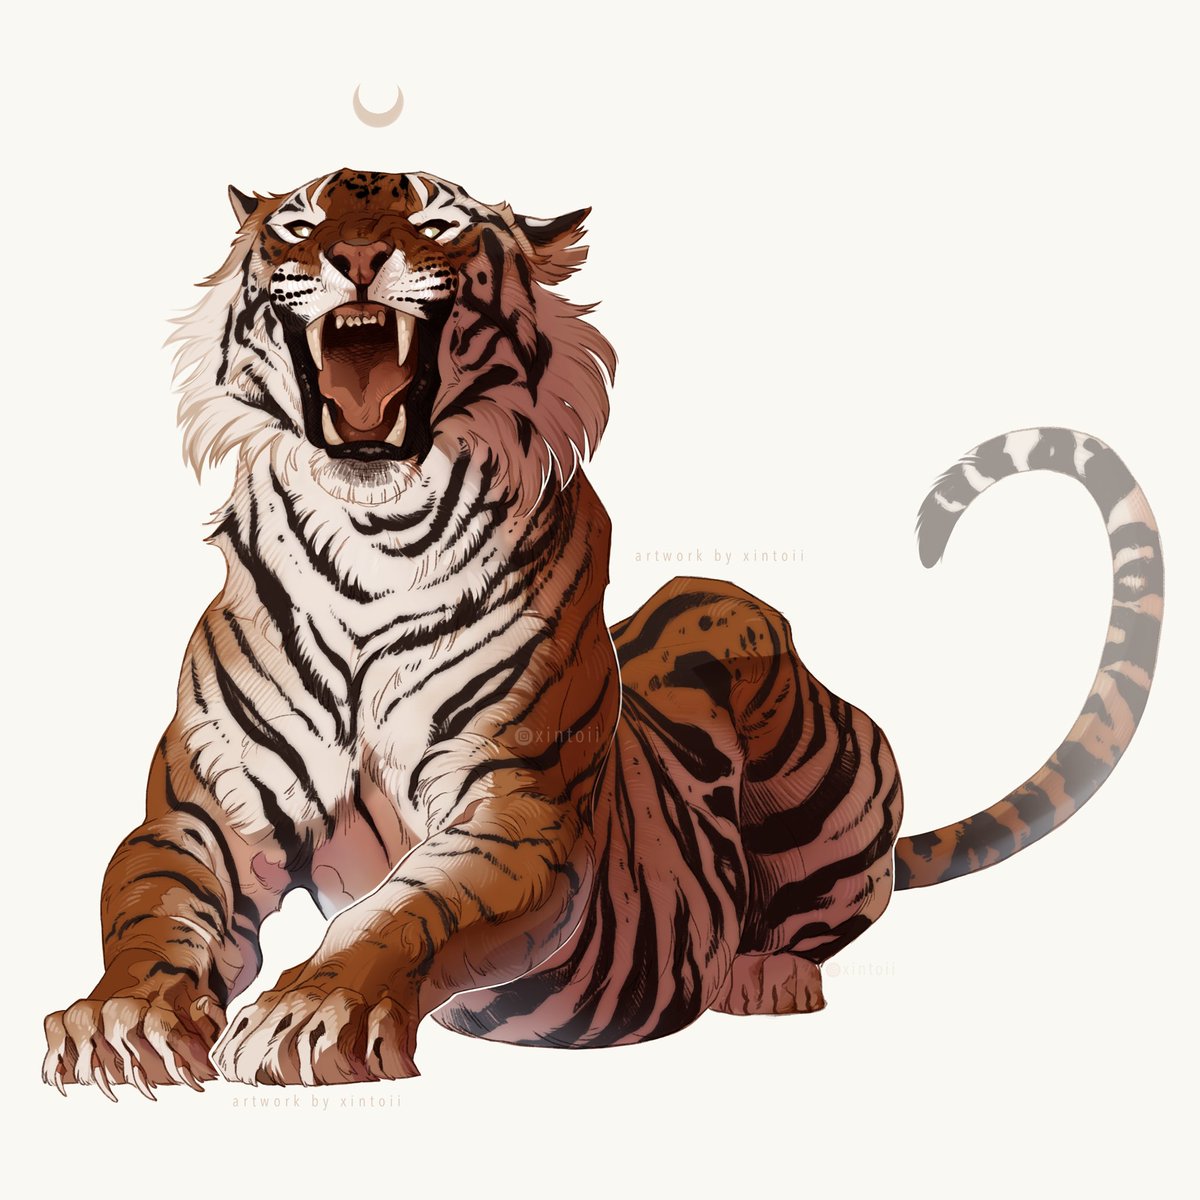 「more tigers! 」|xintoiiのイラスト